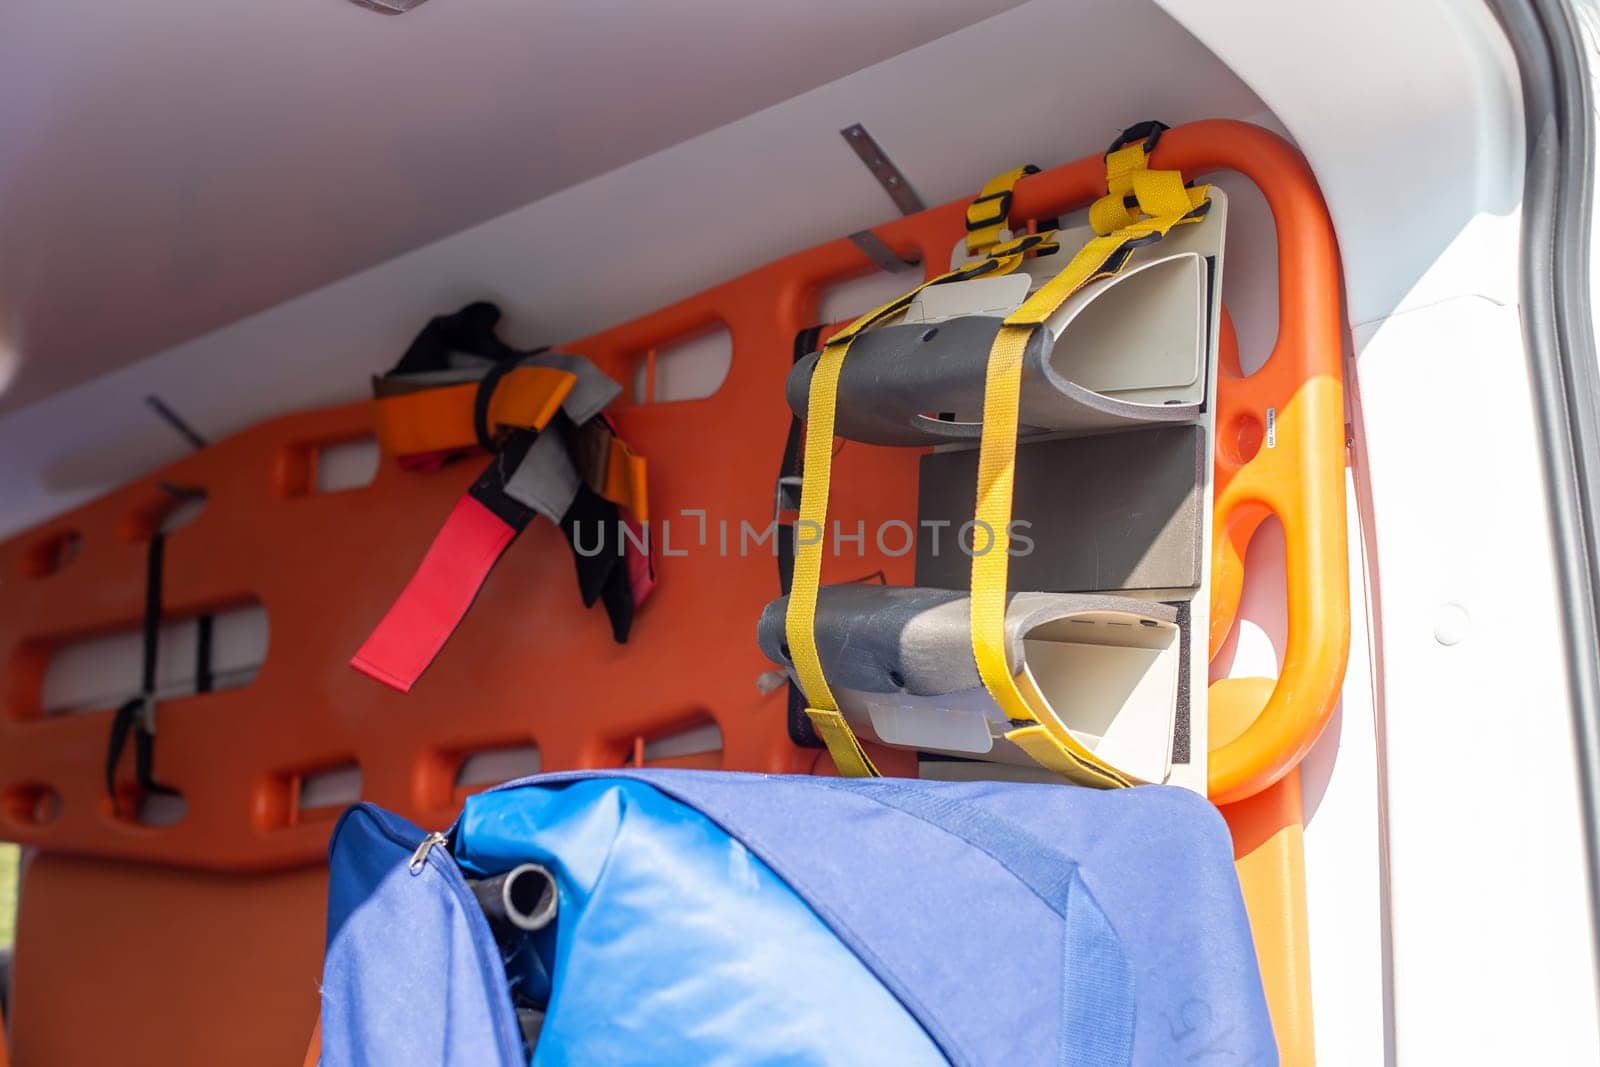 A close-up of an orange stretcher with a fixation hanging on the wall in the cabin of an ambulance by Zakharova